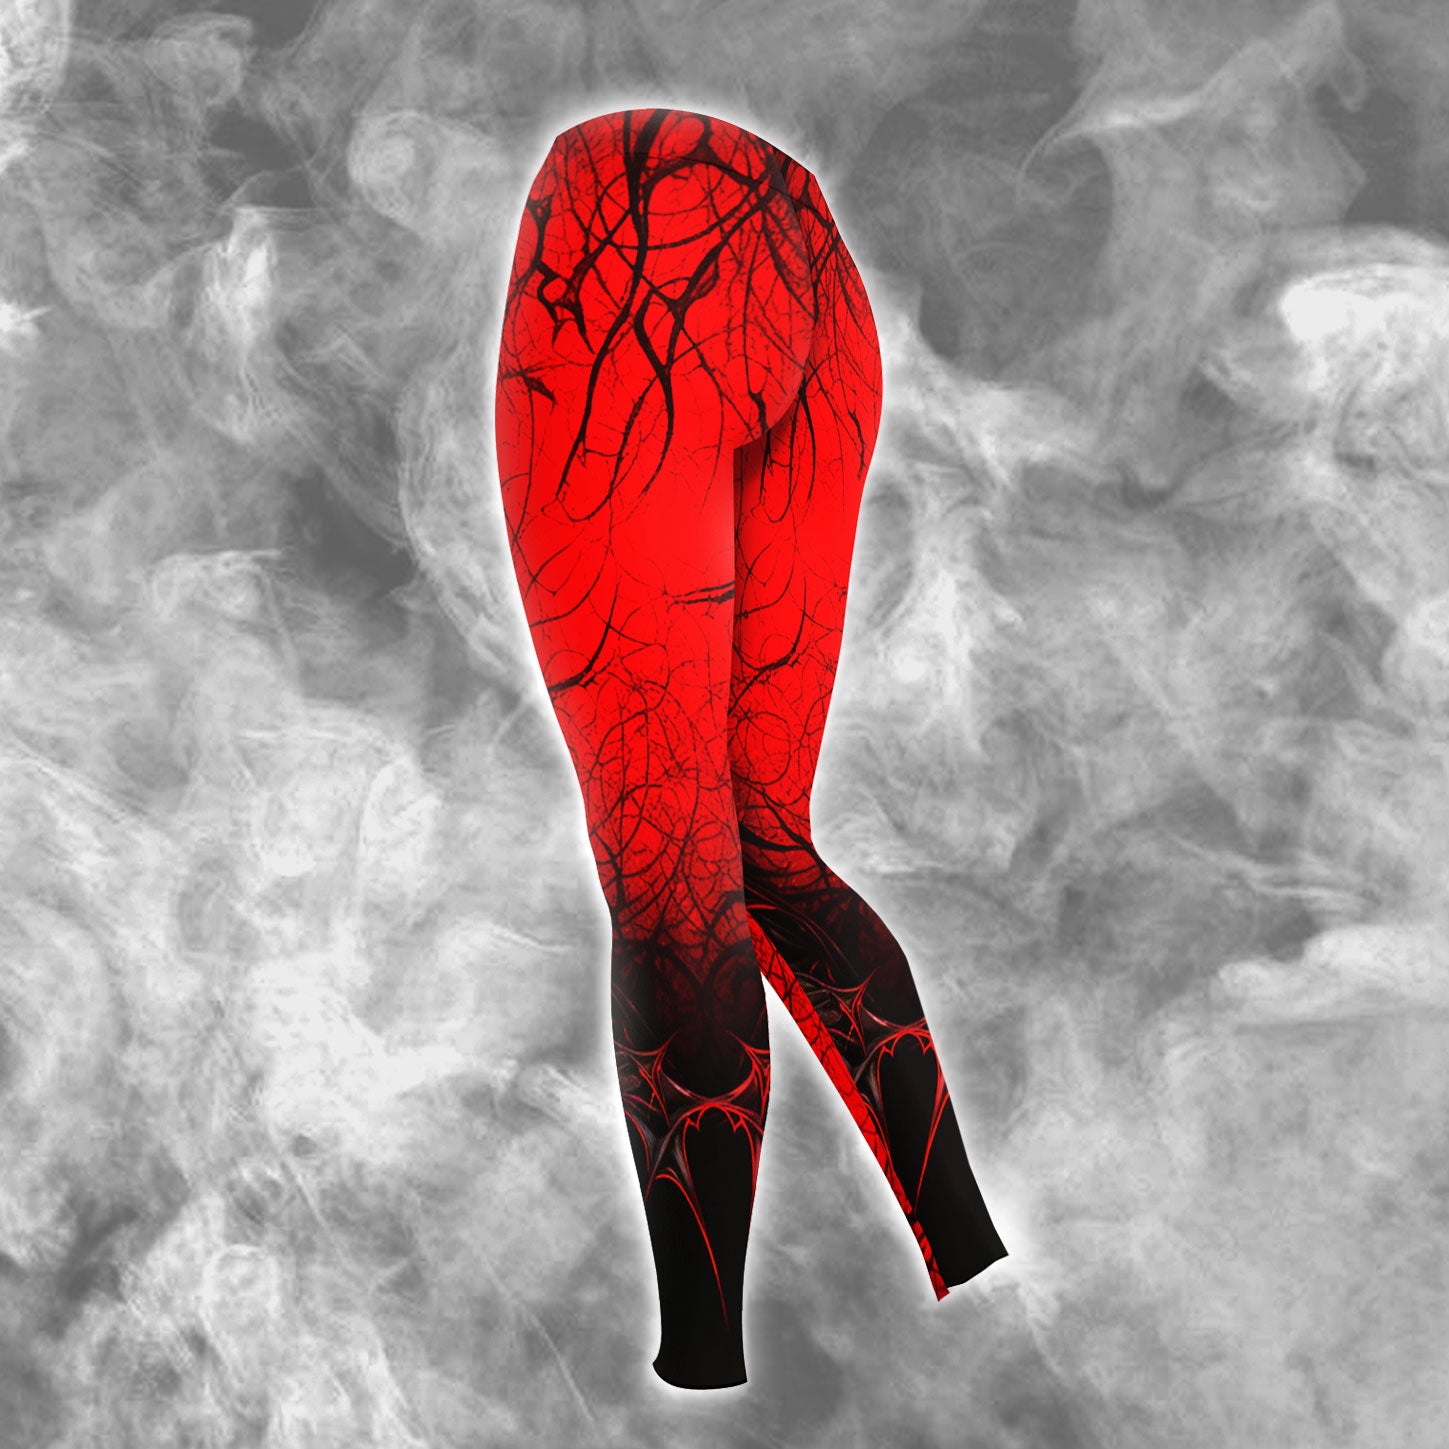 Black Red Nightmare Gothic Combo Hoodie and Leggings - Dark and edgy matching set with skull designs for a unique and stylish look.